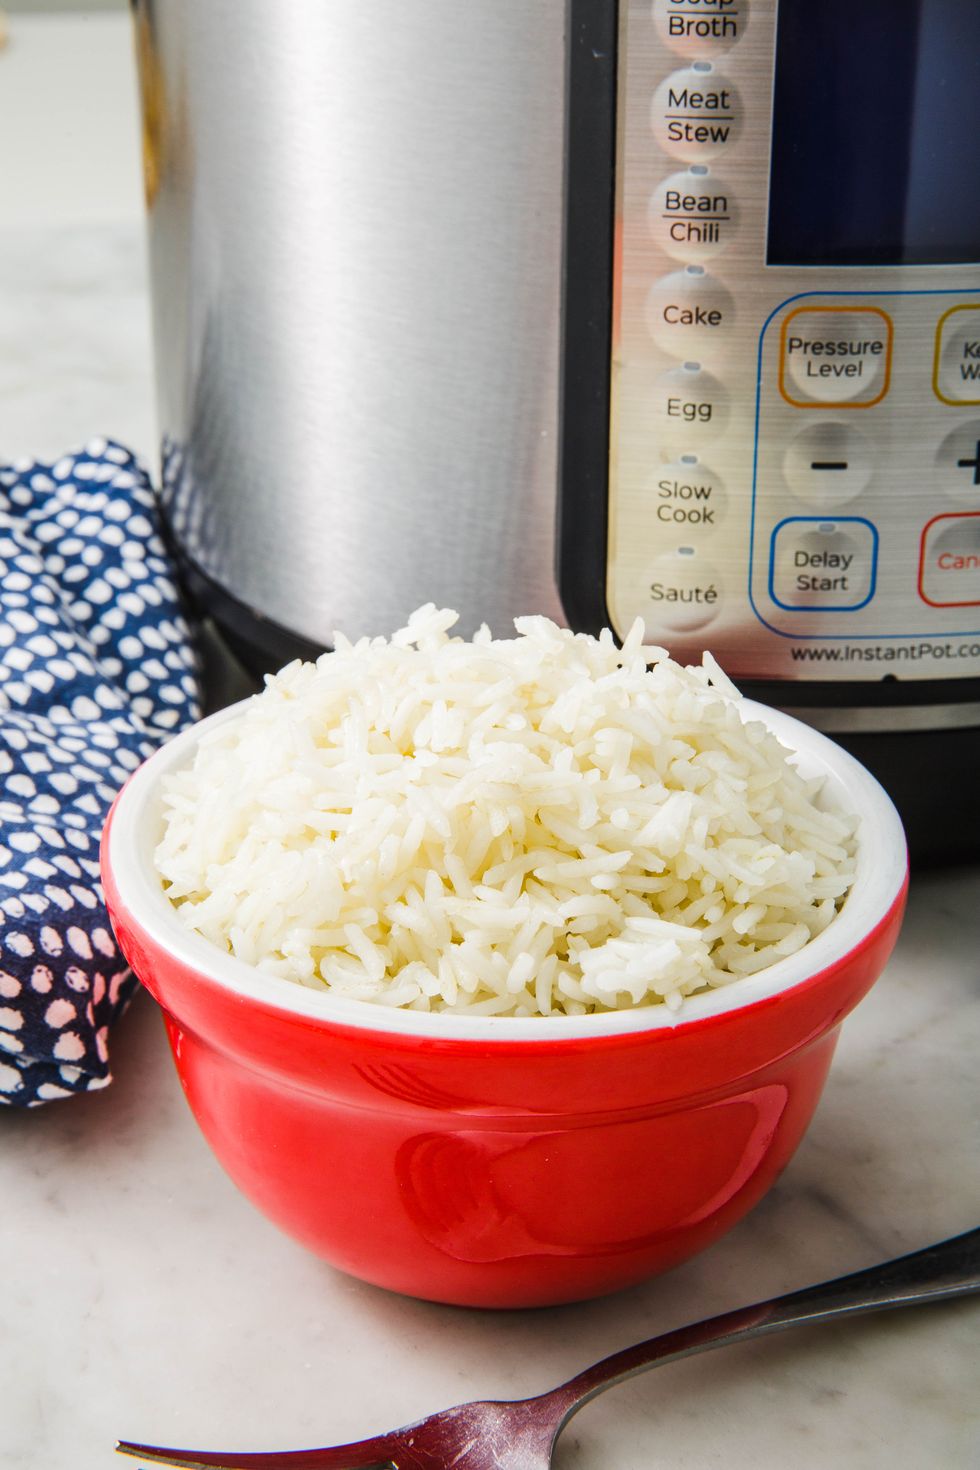 10 Foods You Should Seriously Never Cook in Your Instant Pot